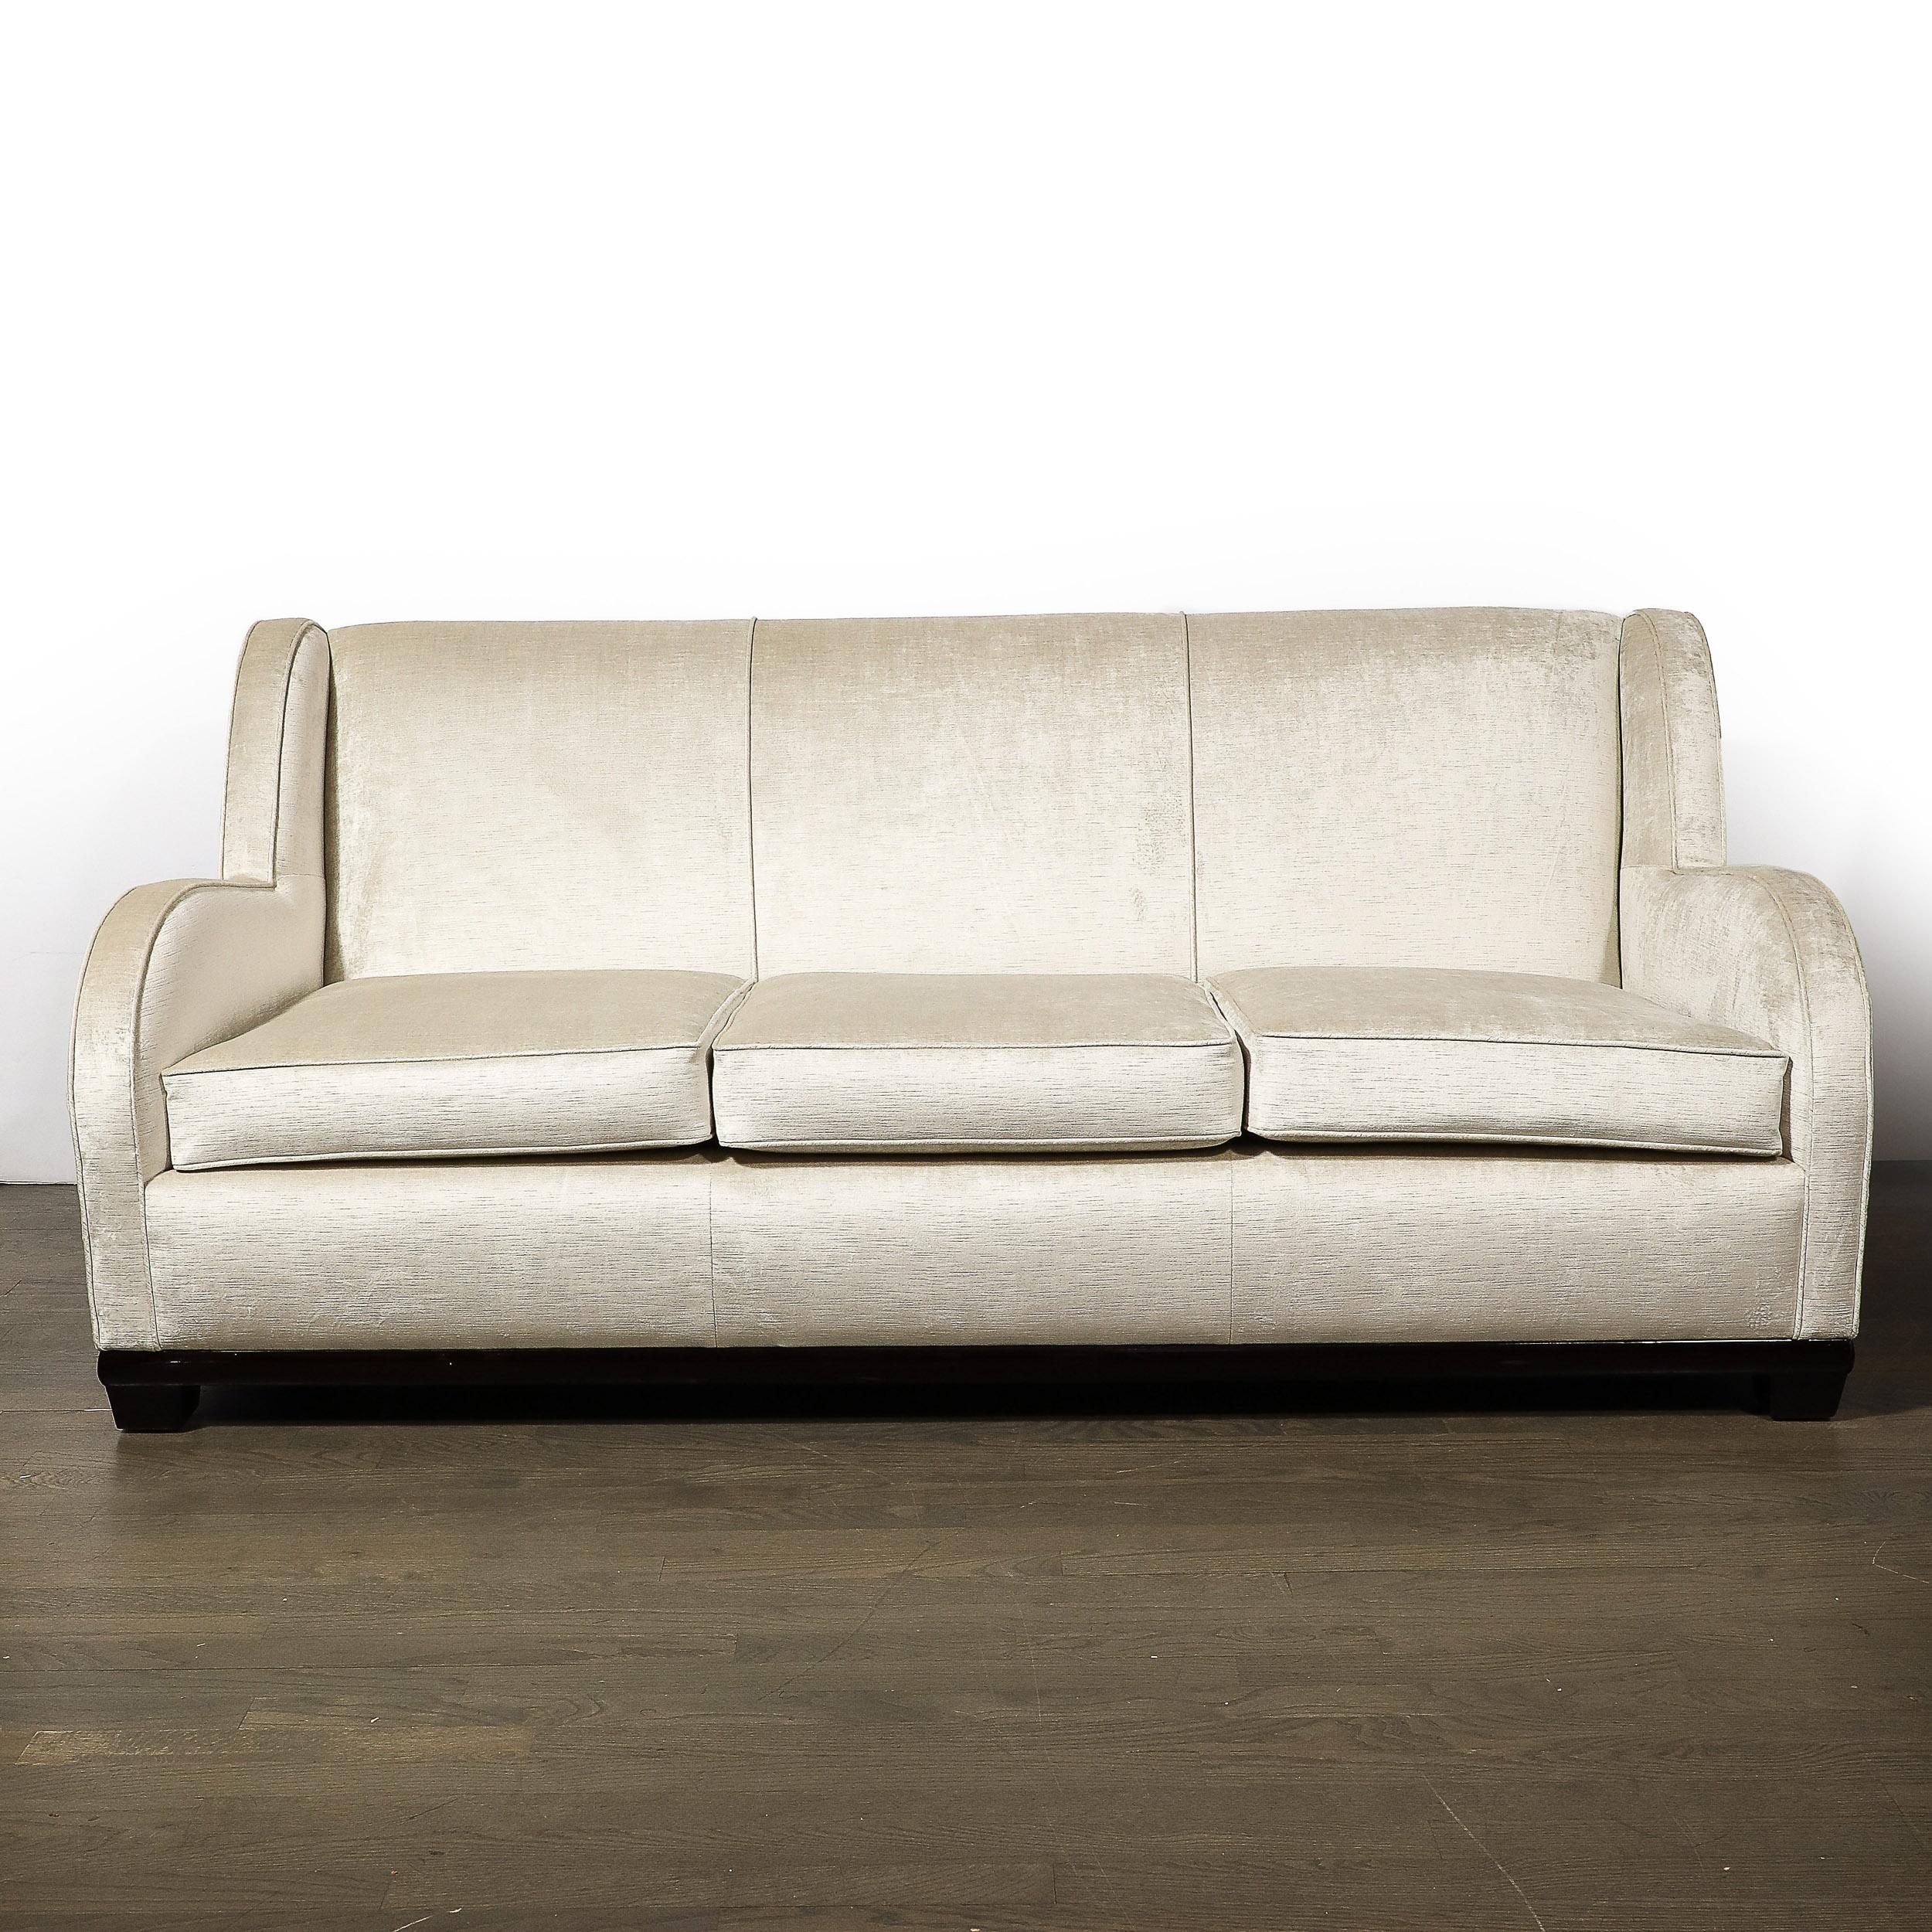 This elegant and historically important sofa was designed by the legendary Donald Deskey- the man responsible for the design of Radio City Music Hall where this sofa was originally housed- in 1932. This iconic piece offers a cloud form motif